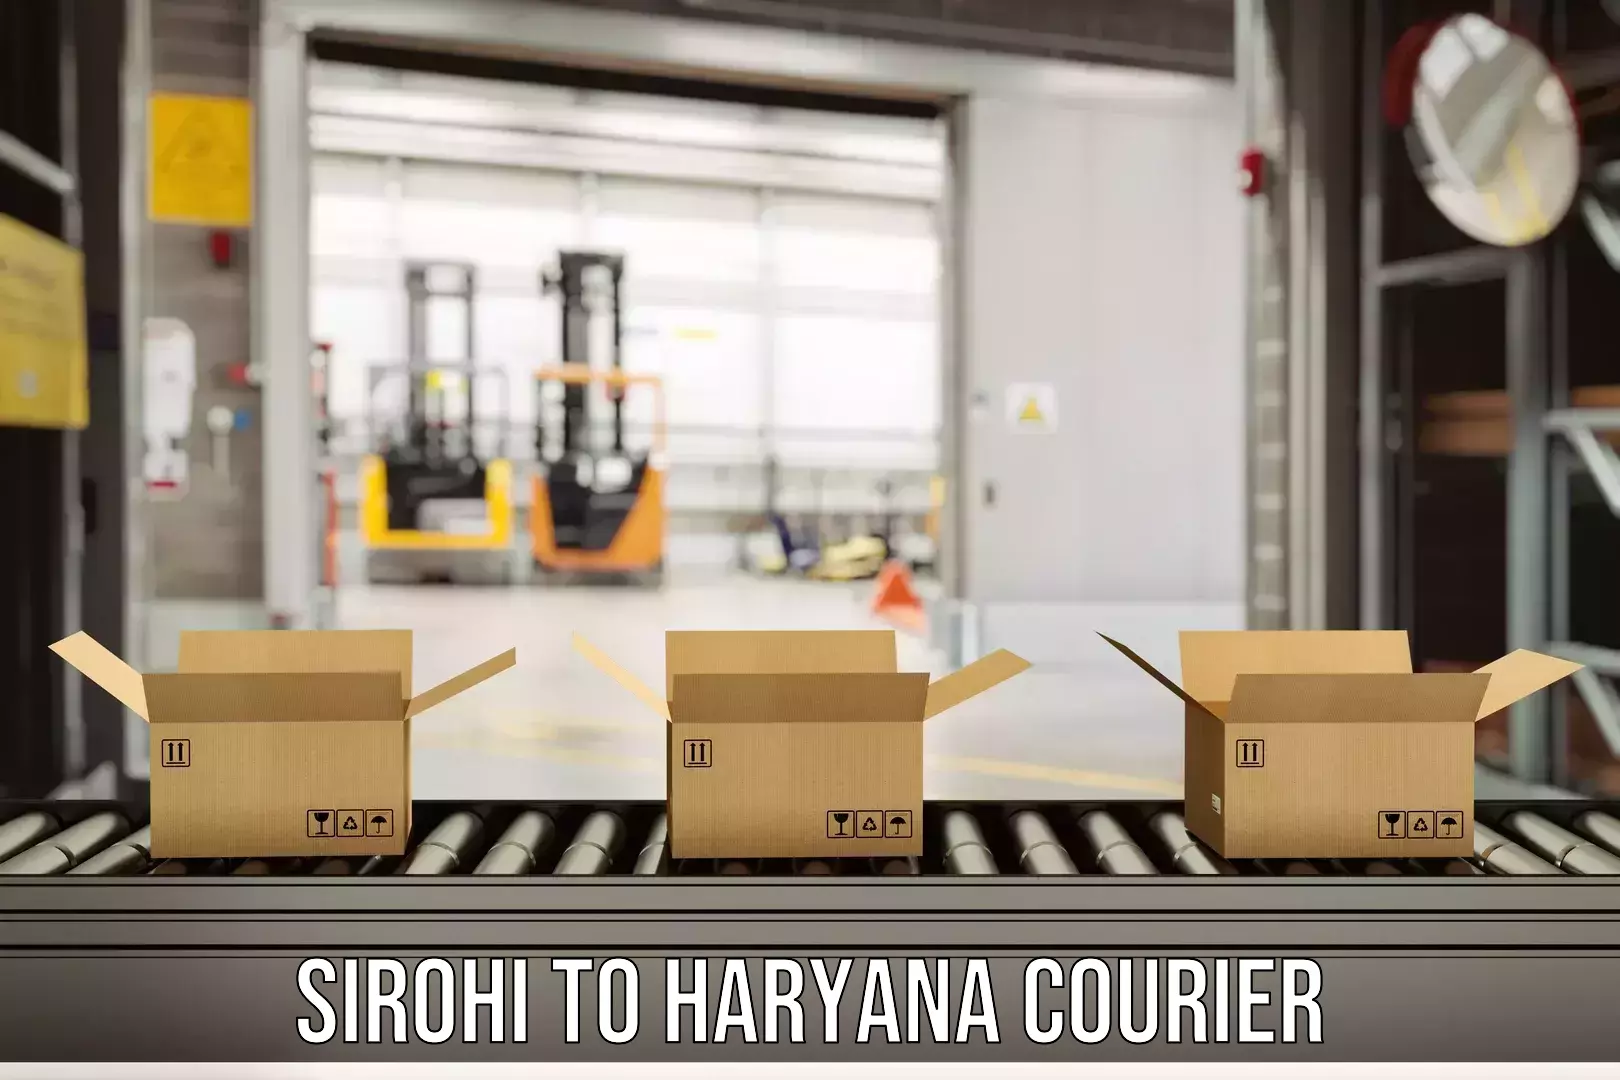 Personalized courier experiences Sirohi to Chaudhary Charan Singh Haryana Agricultural University Hisar